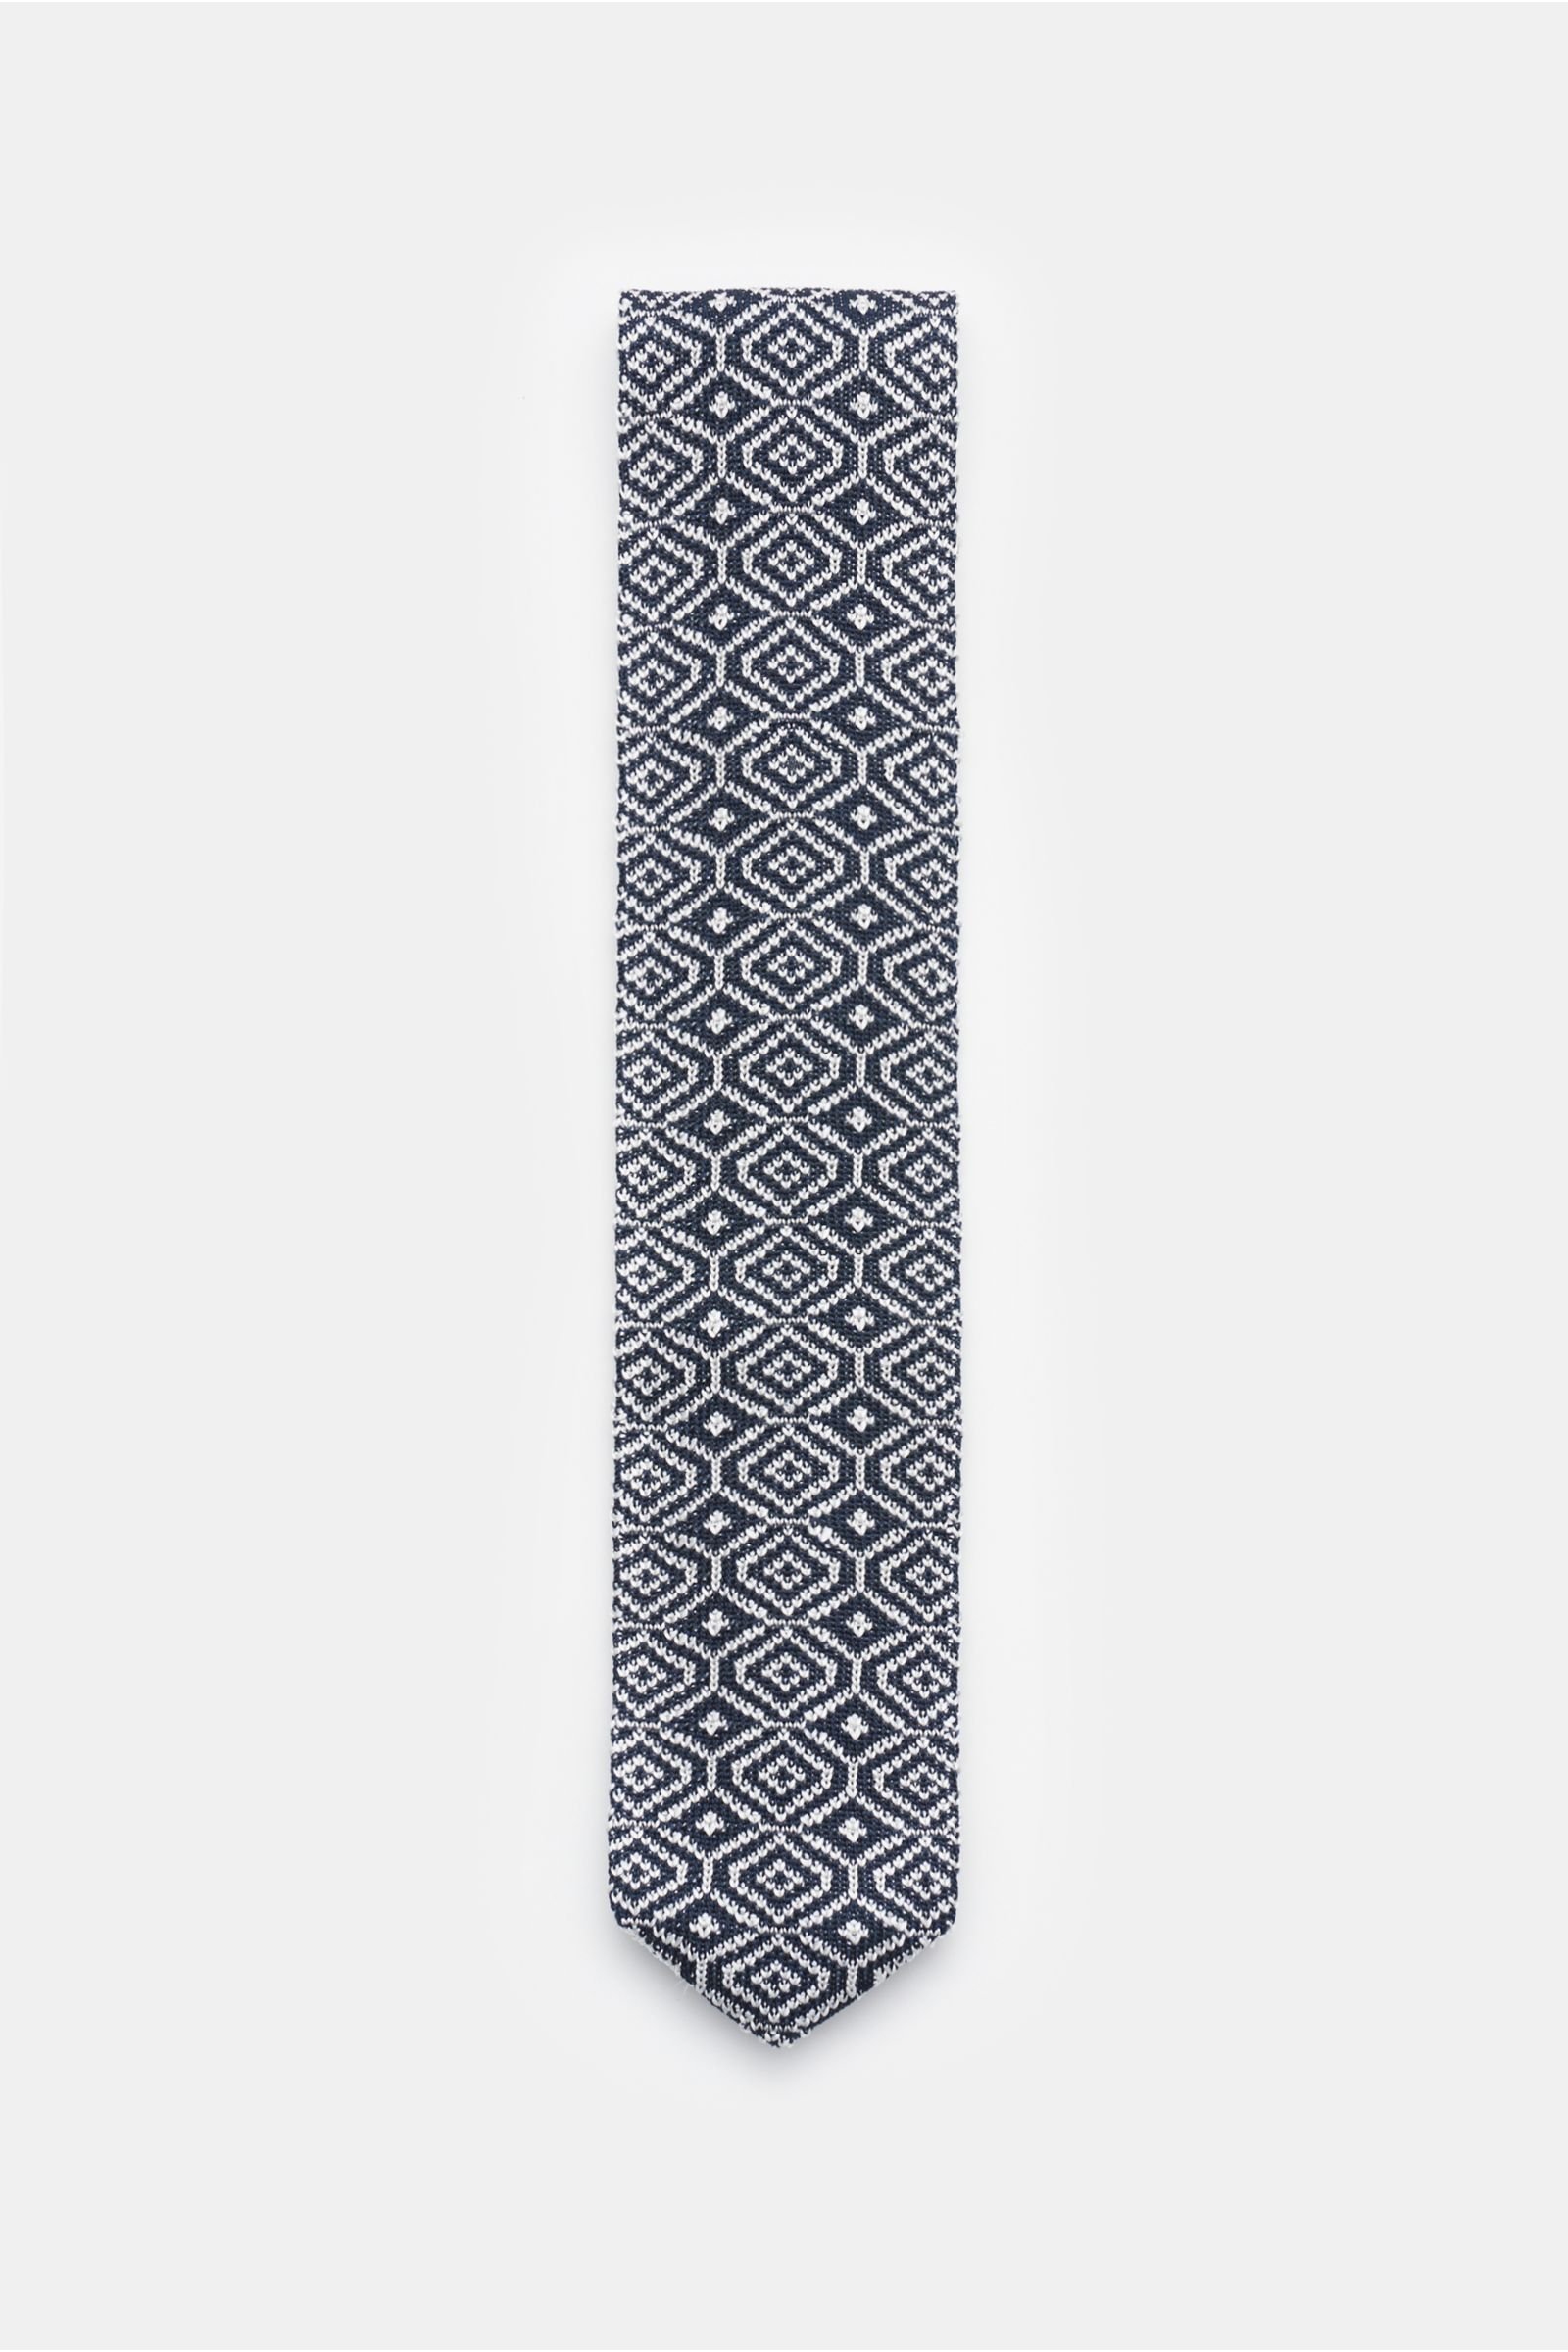 Silk knitted tie in navy/white patterned